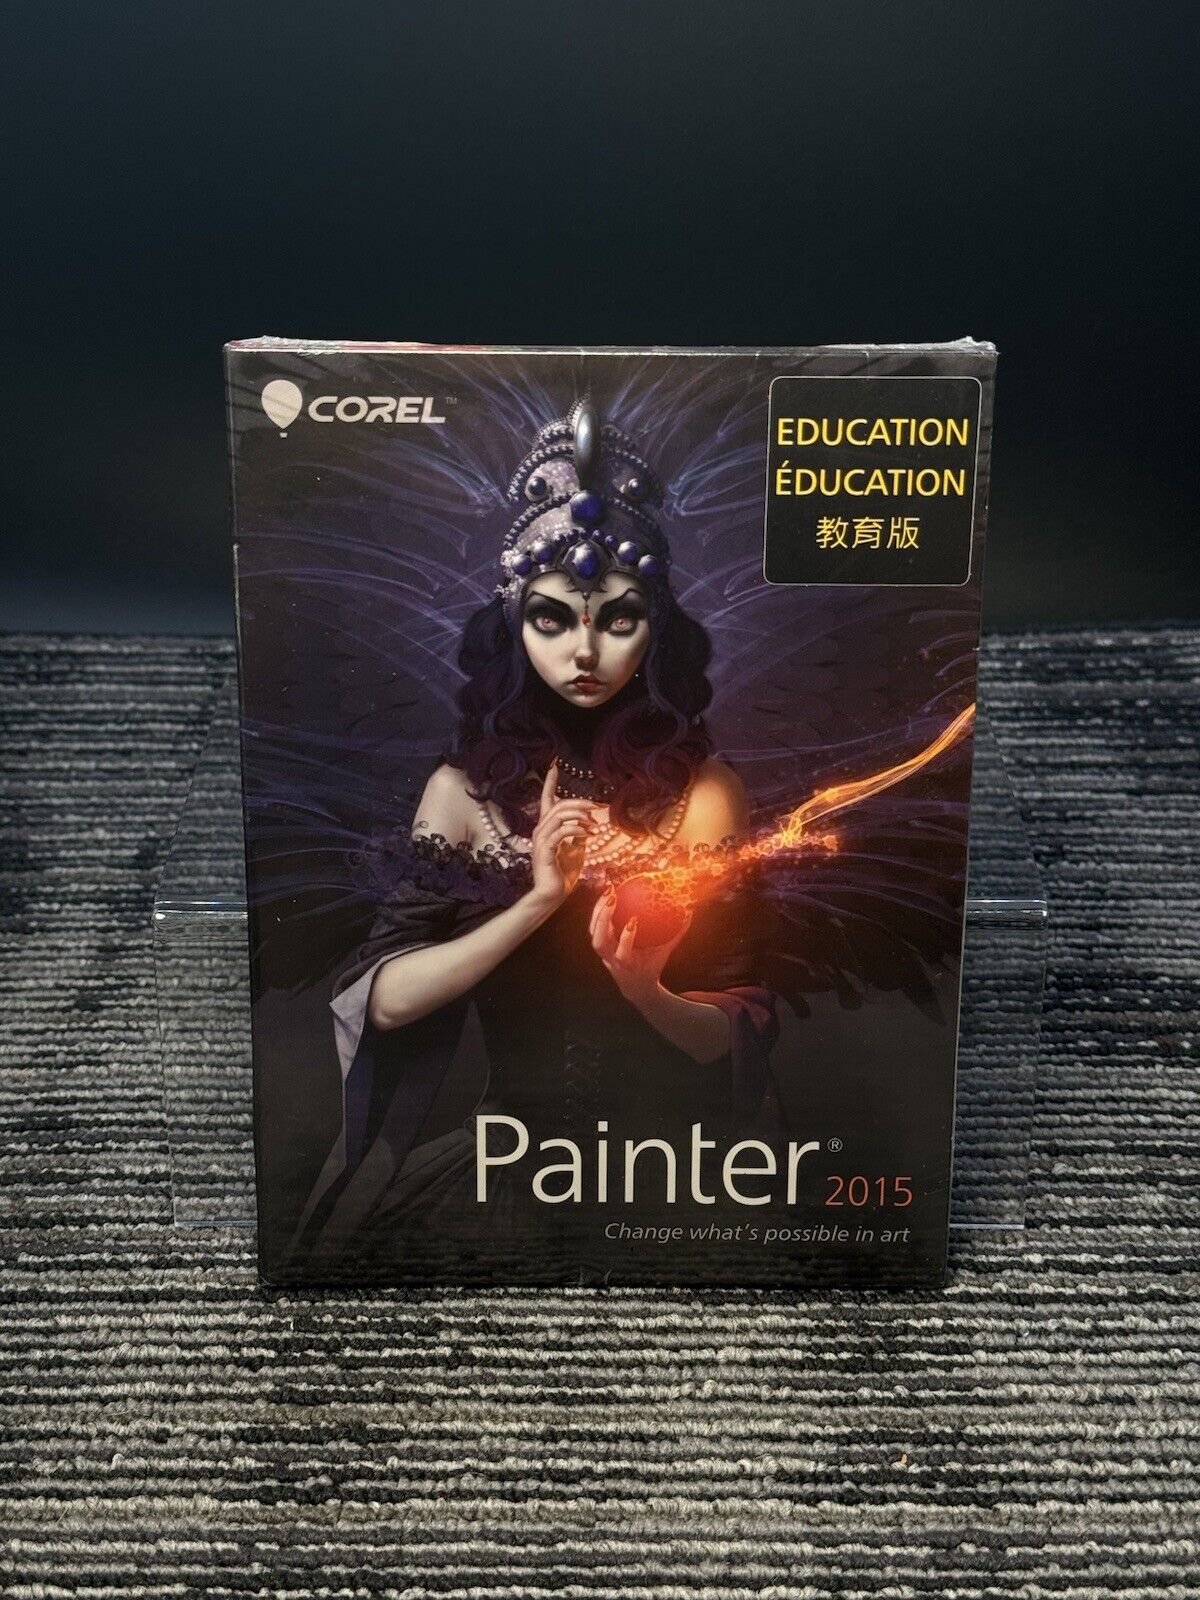 Corel Painter 2015 “Change What’s Possible In Art”Mac OS/Win 8 Compatible/Sealed